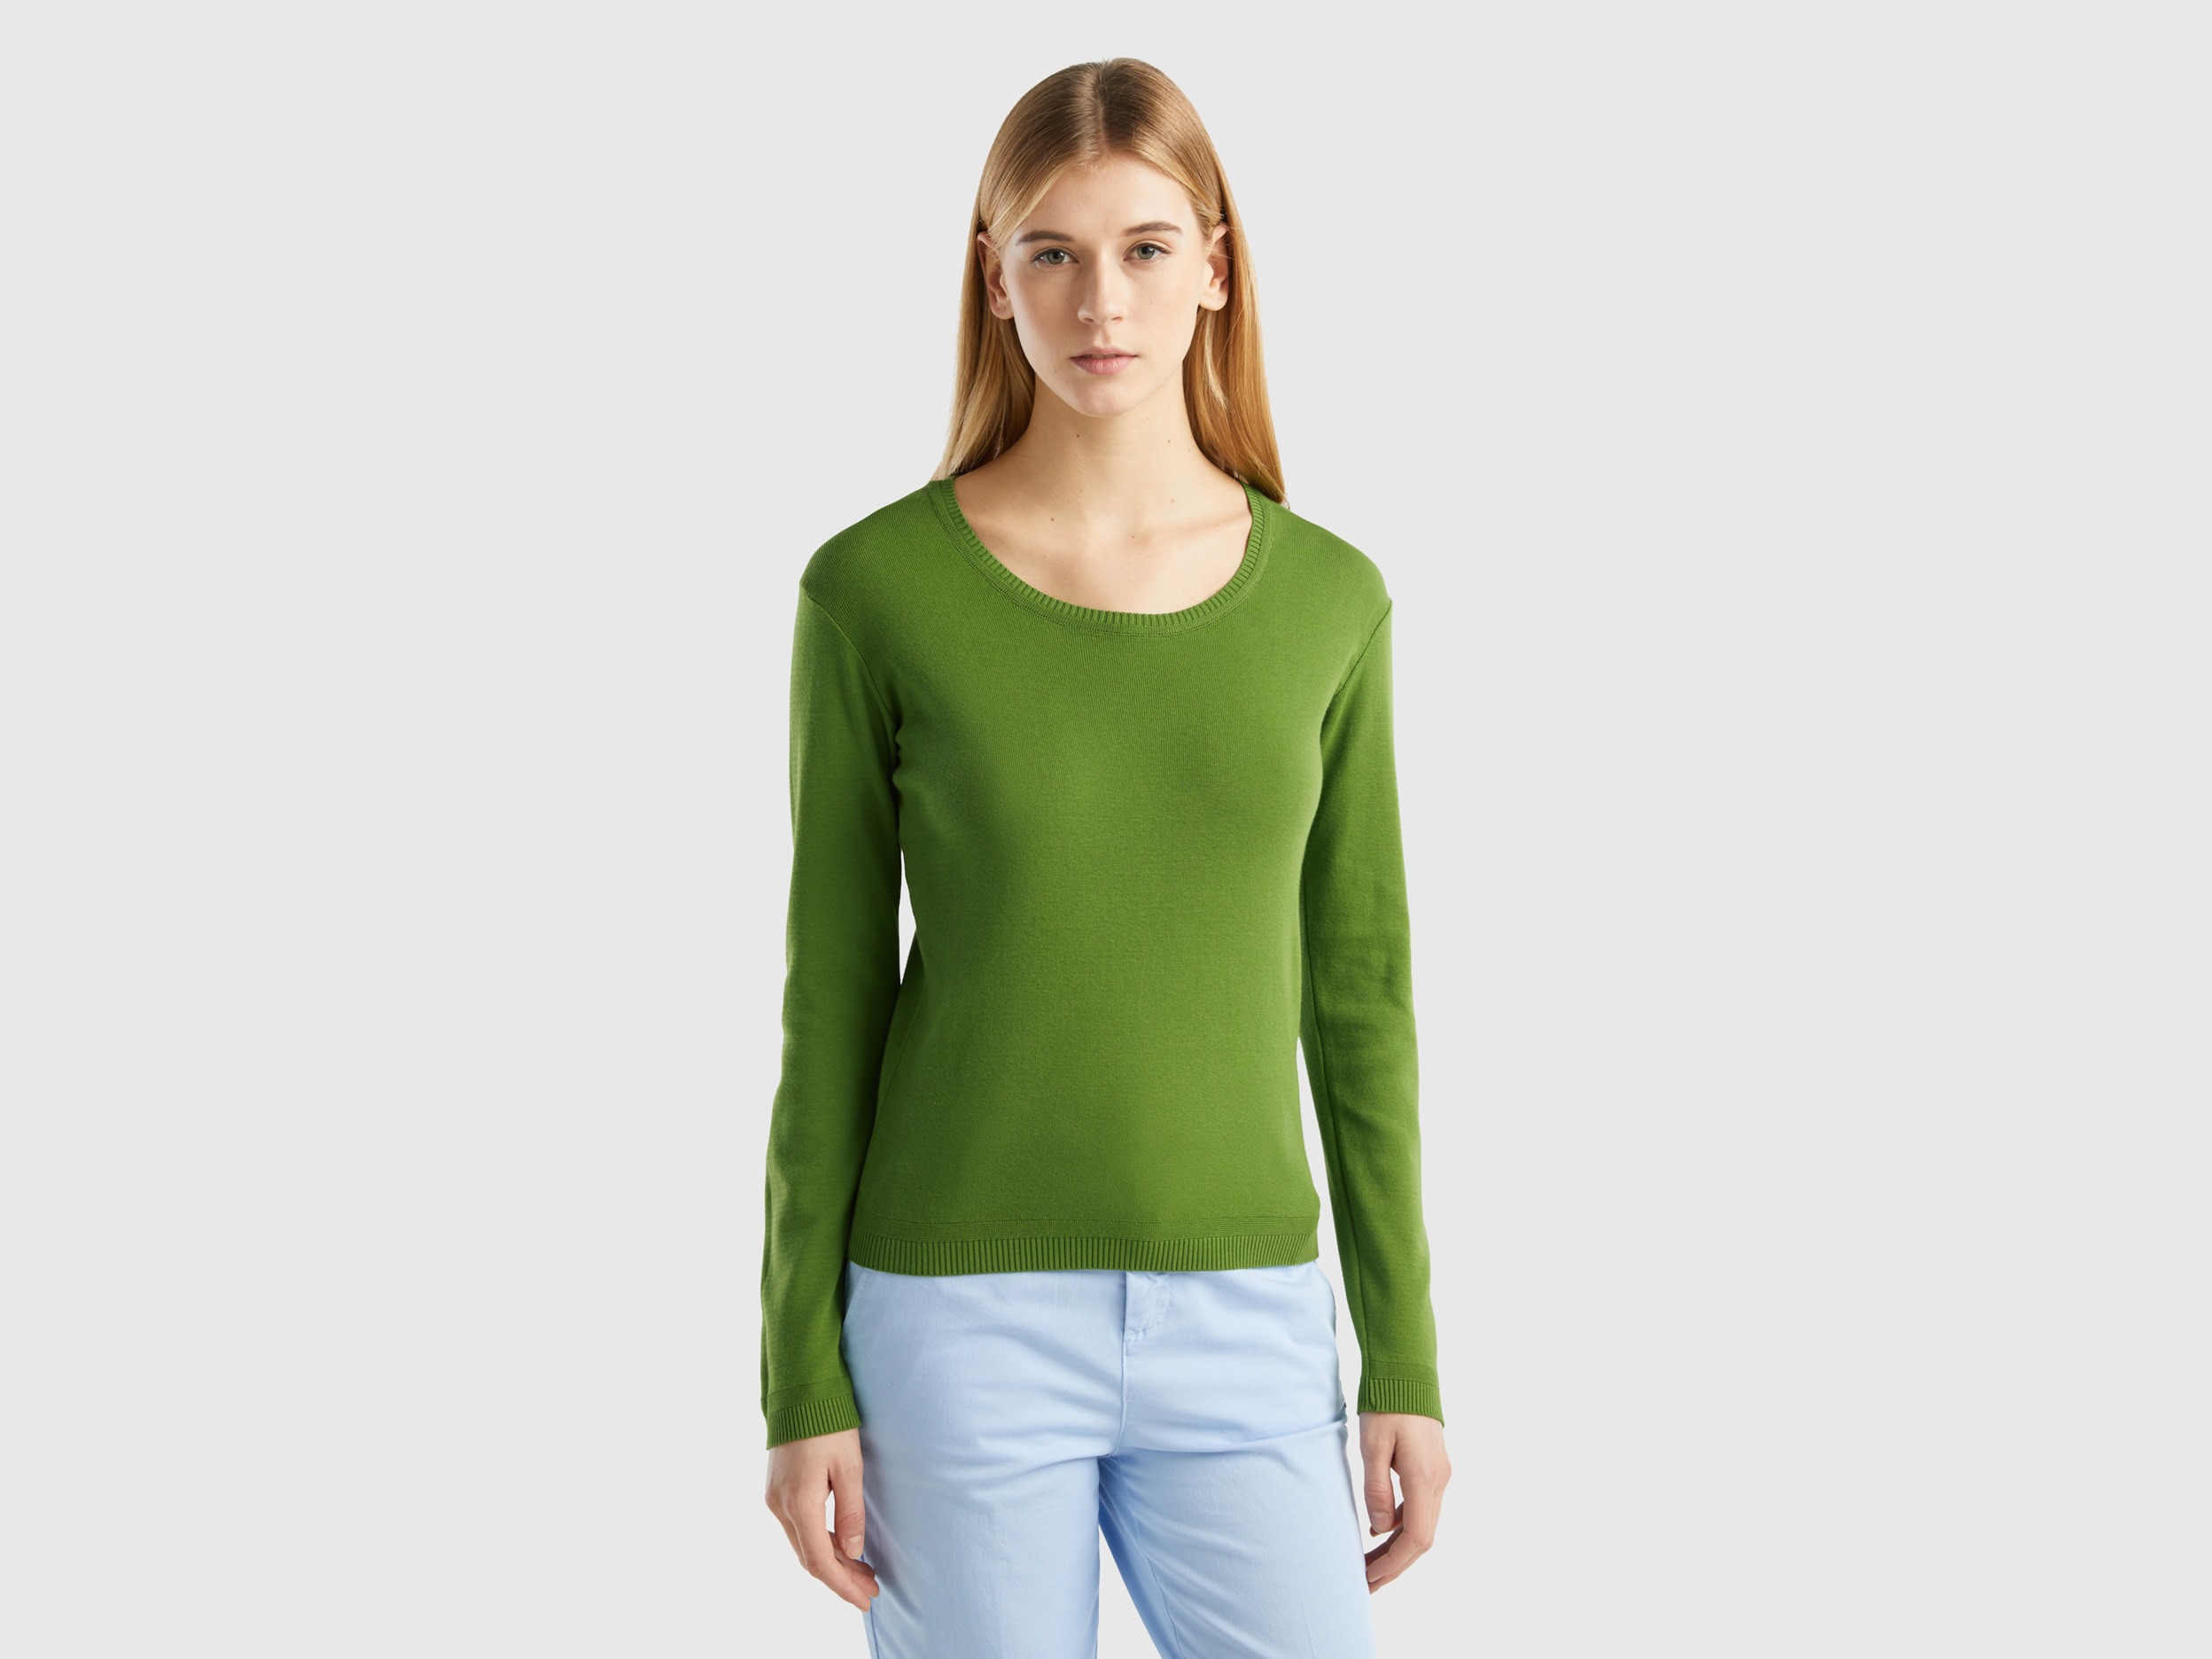 Benetton, Crew Neck Sweater In Pure Cotton, size M, Military Green, Women